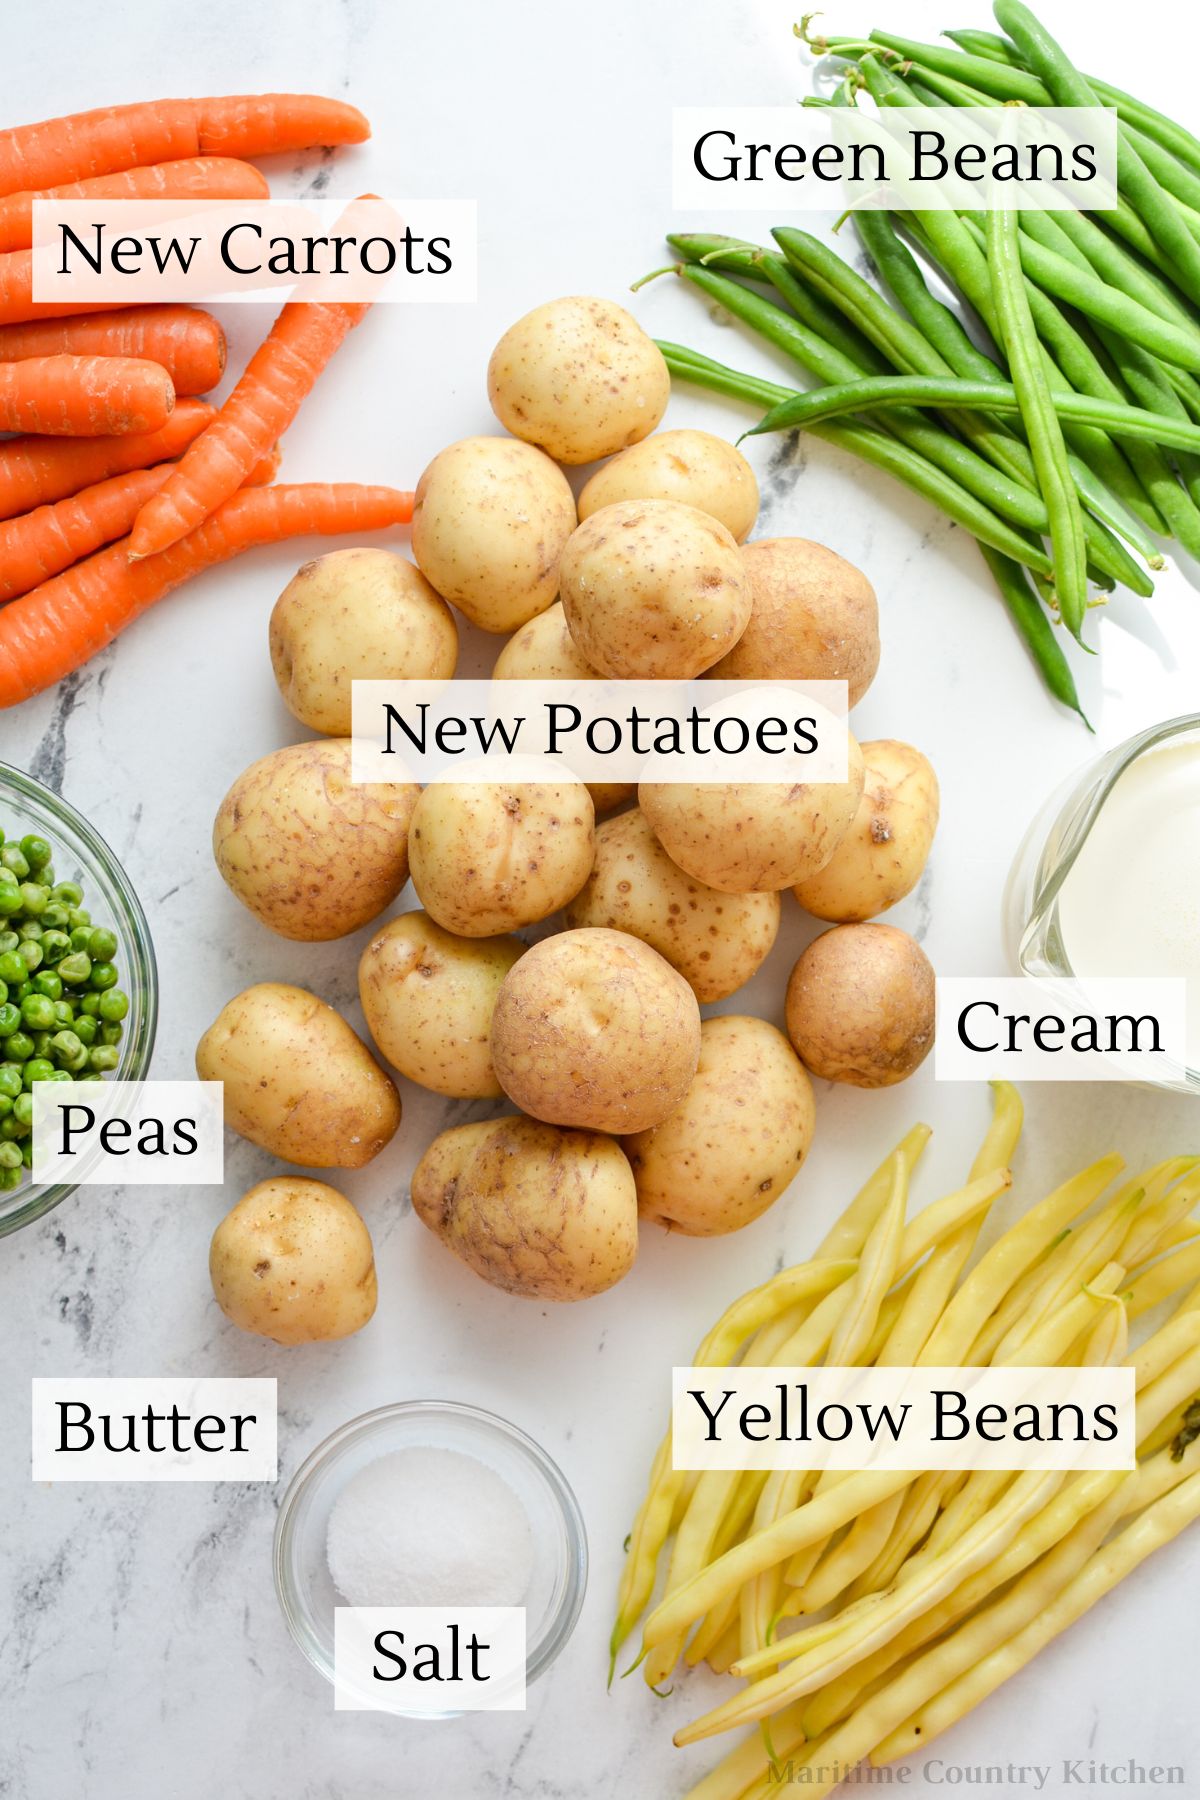 The ingredients needed to make hodge podge: new potatoes, carrots, green beans, yellow beans, cream, butter, salt, and peas.